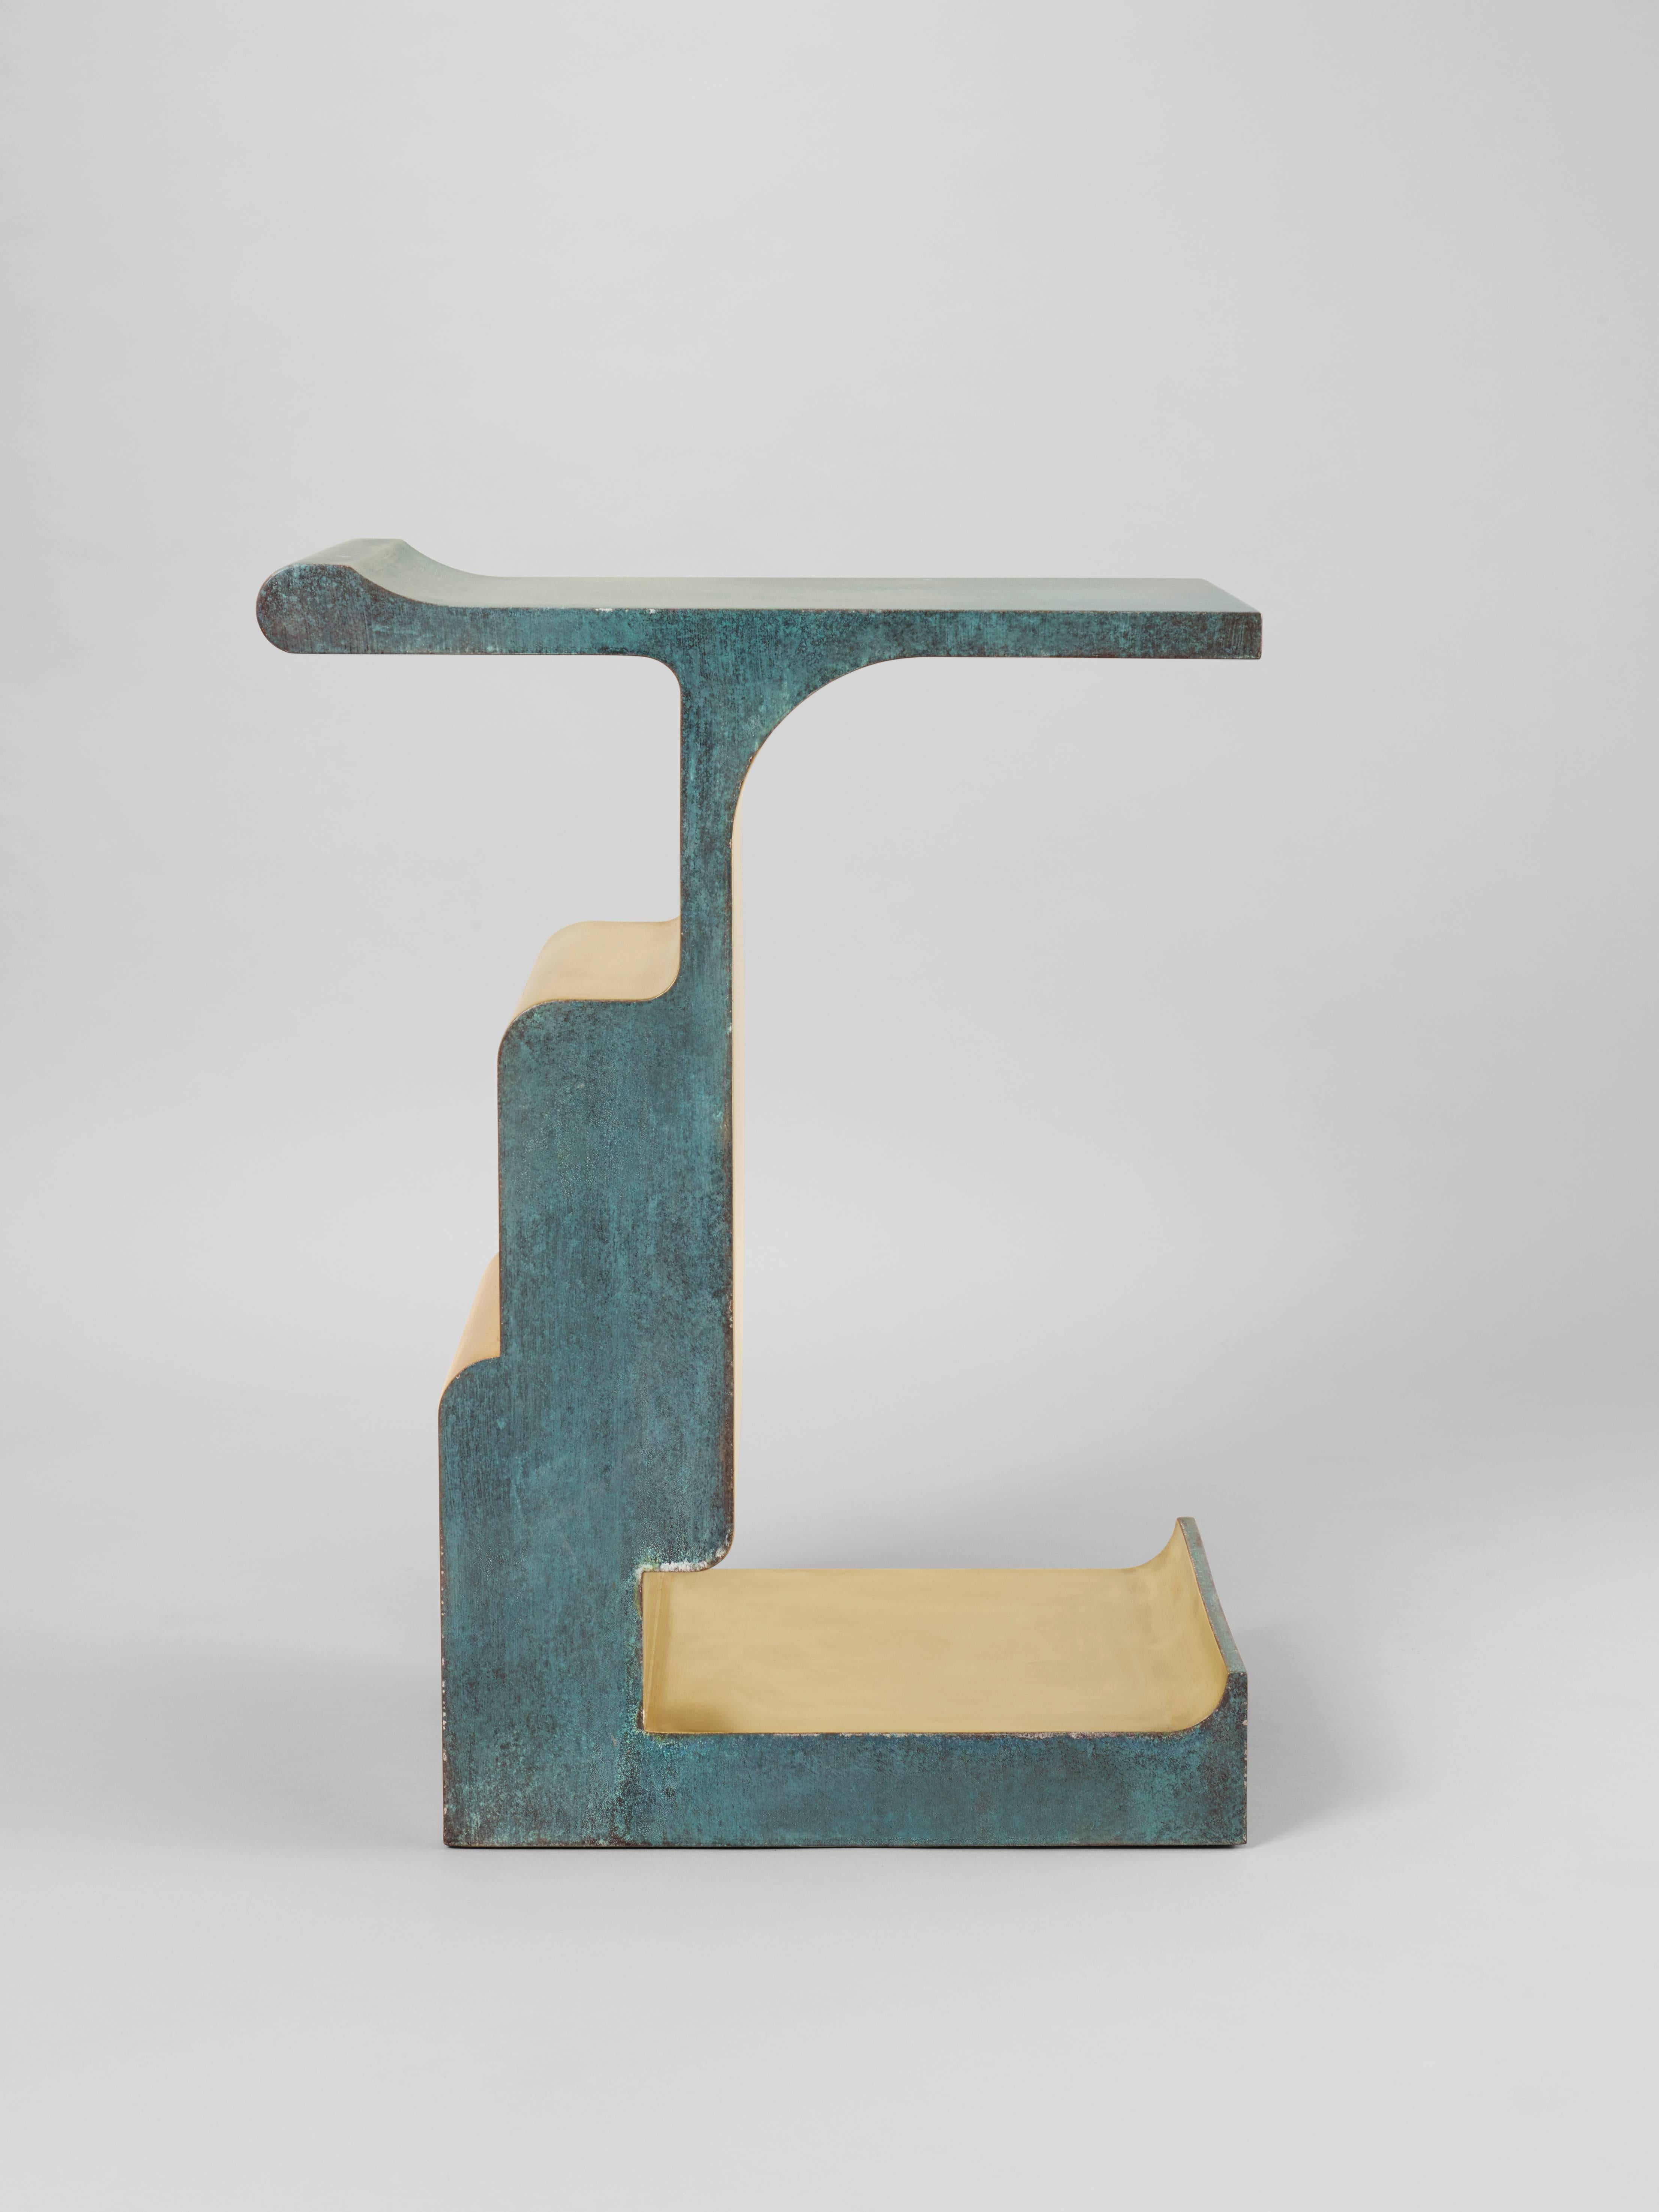 ‘XiangSheng I' Side Table #2 combines brushed bronze with a refined champagne color and oxidized bronze with a deep Etruscan green patina. This collectible design is part of the ‘XiangSheng’ furniture collection by much acclaimed duo Studio MVW.